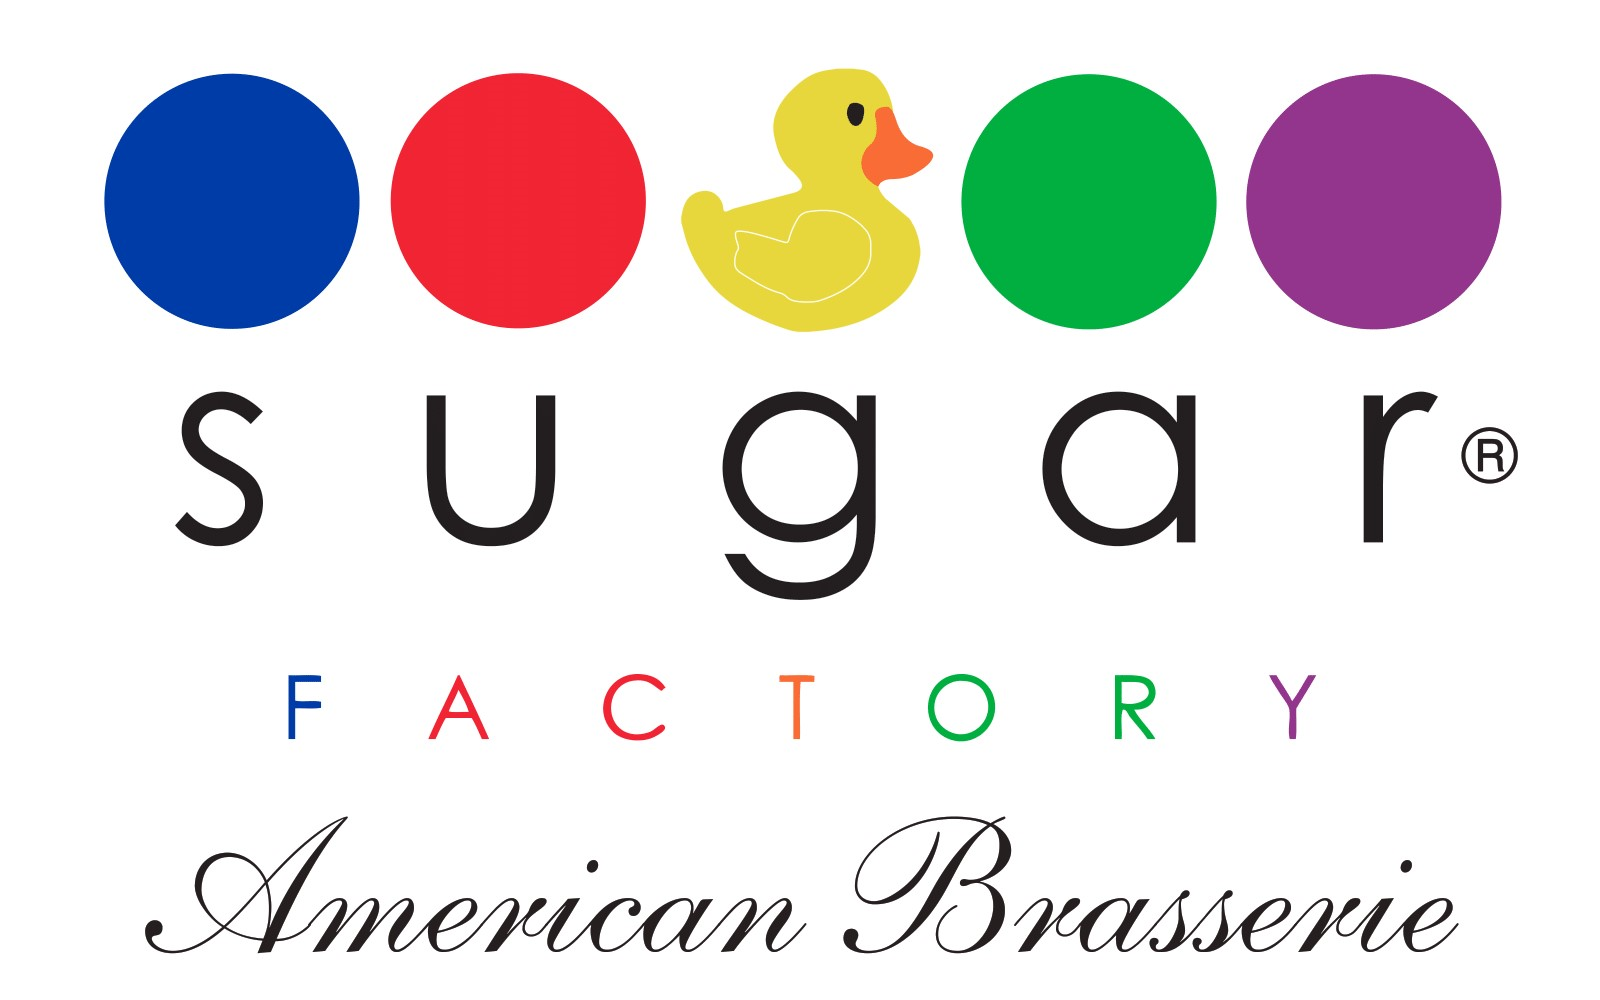 A logo with colorful circles and a duck Description automatically generated